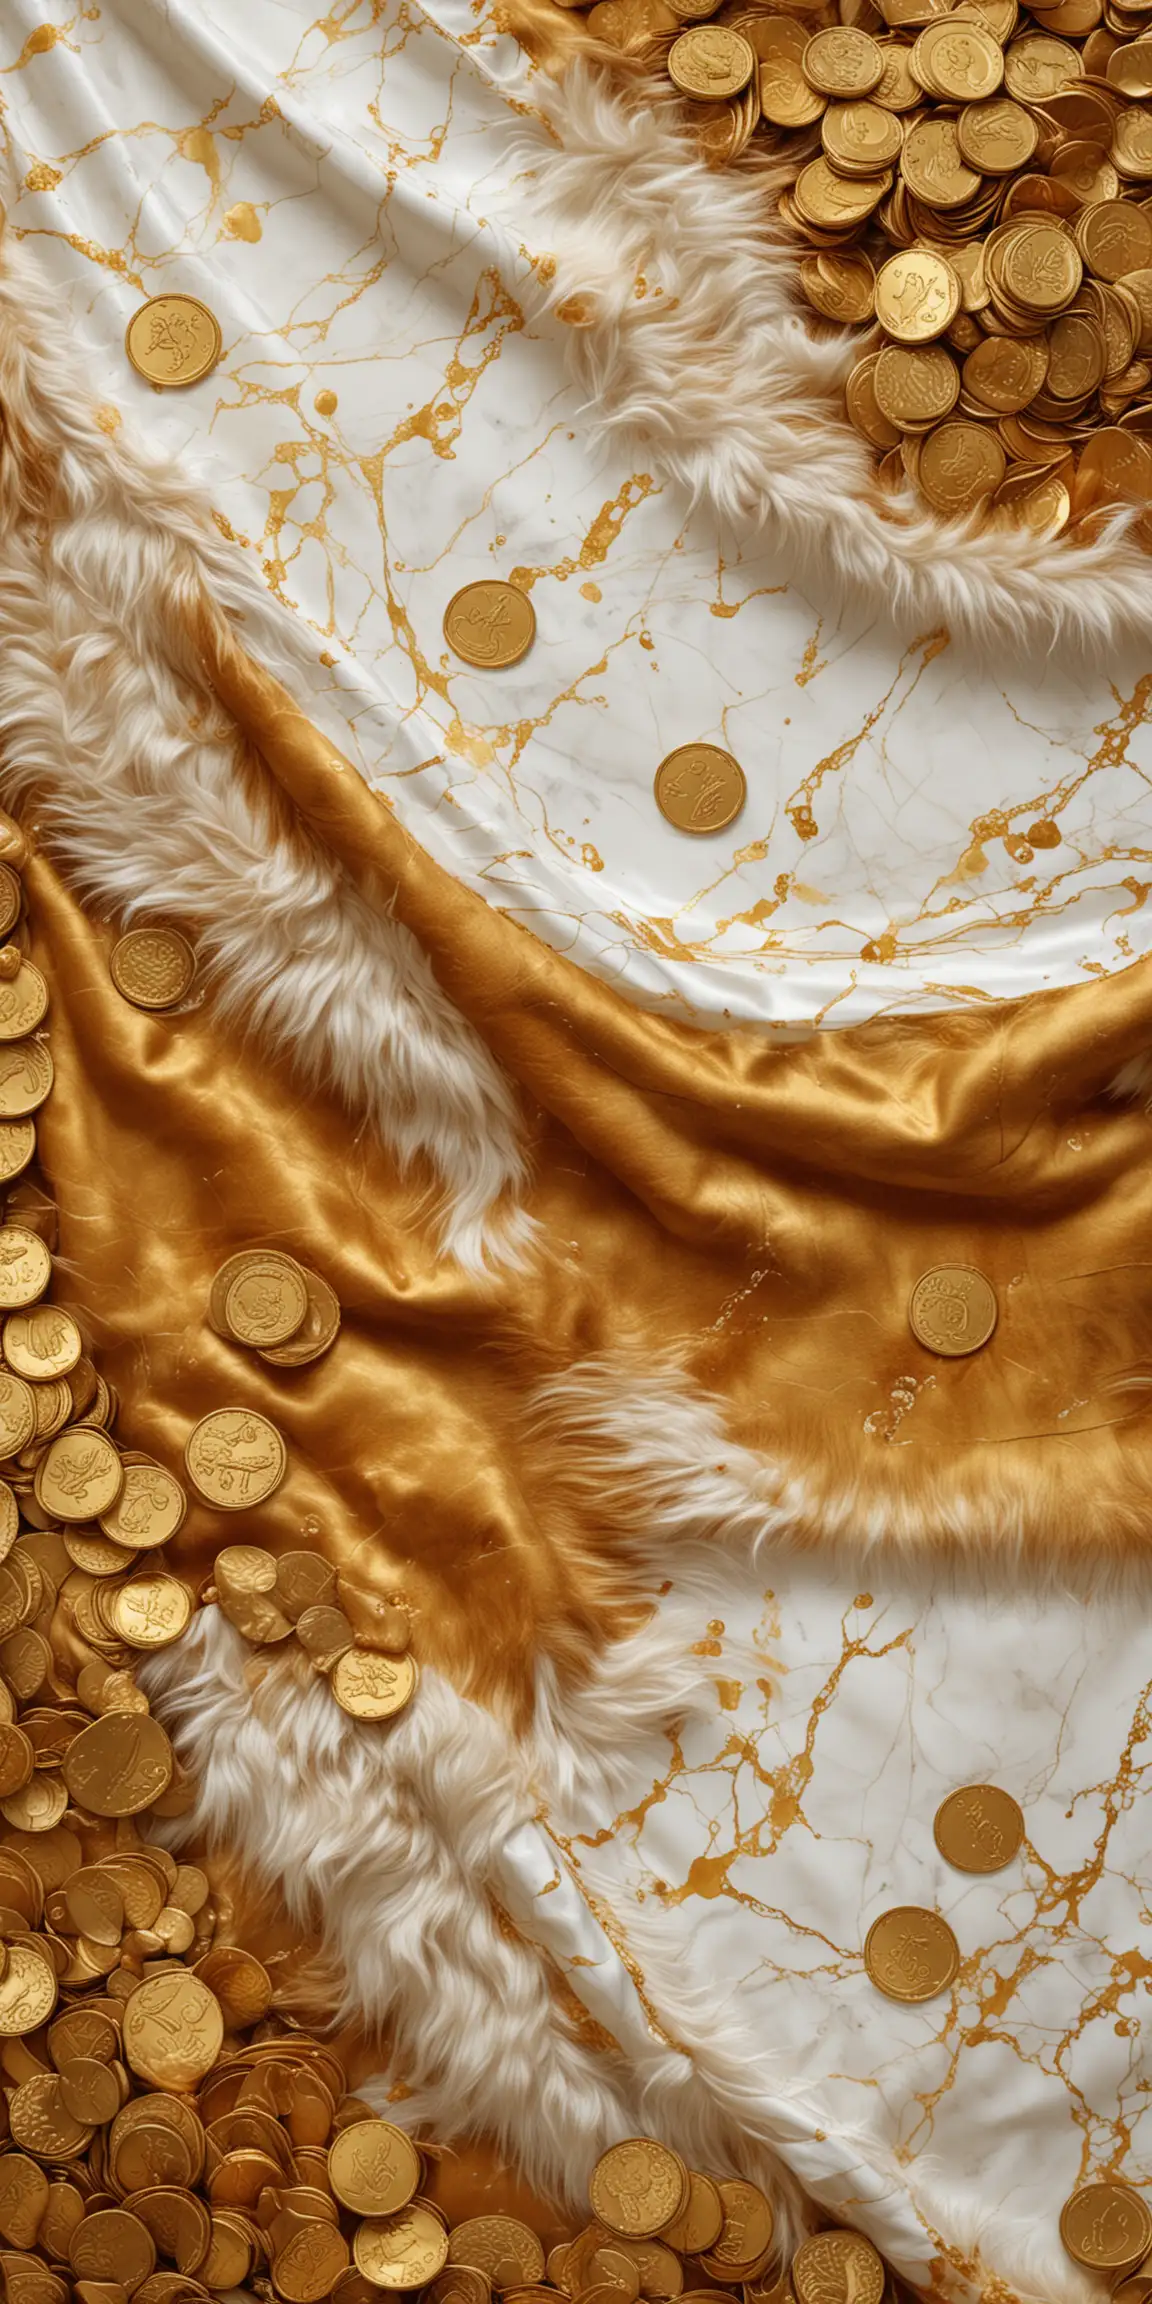 Surreal Marble Flag Banner with Golden Treasures and Honey Brown Fur Accents